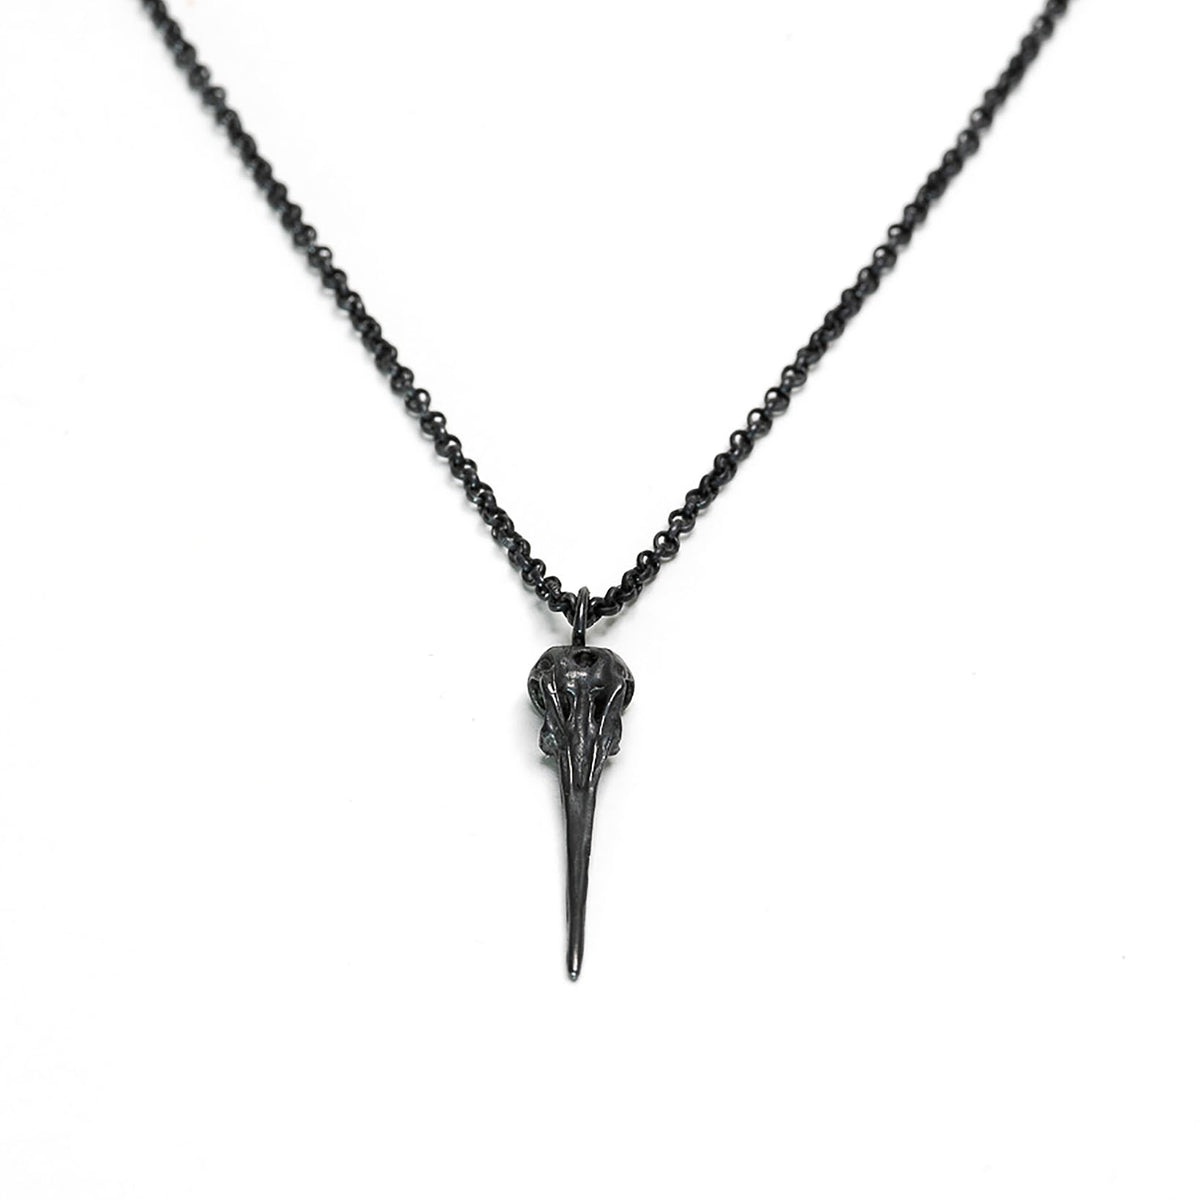 Blackened Sterling Silver Hummingbird Necklace by Oracle Jayne Station